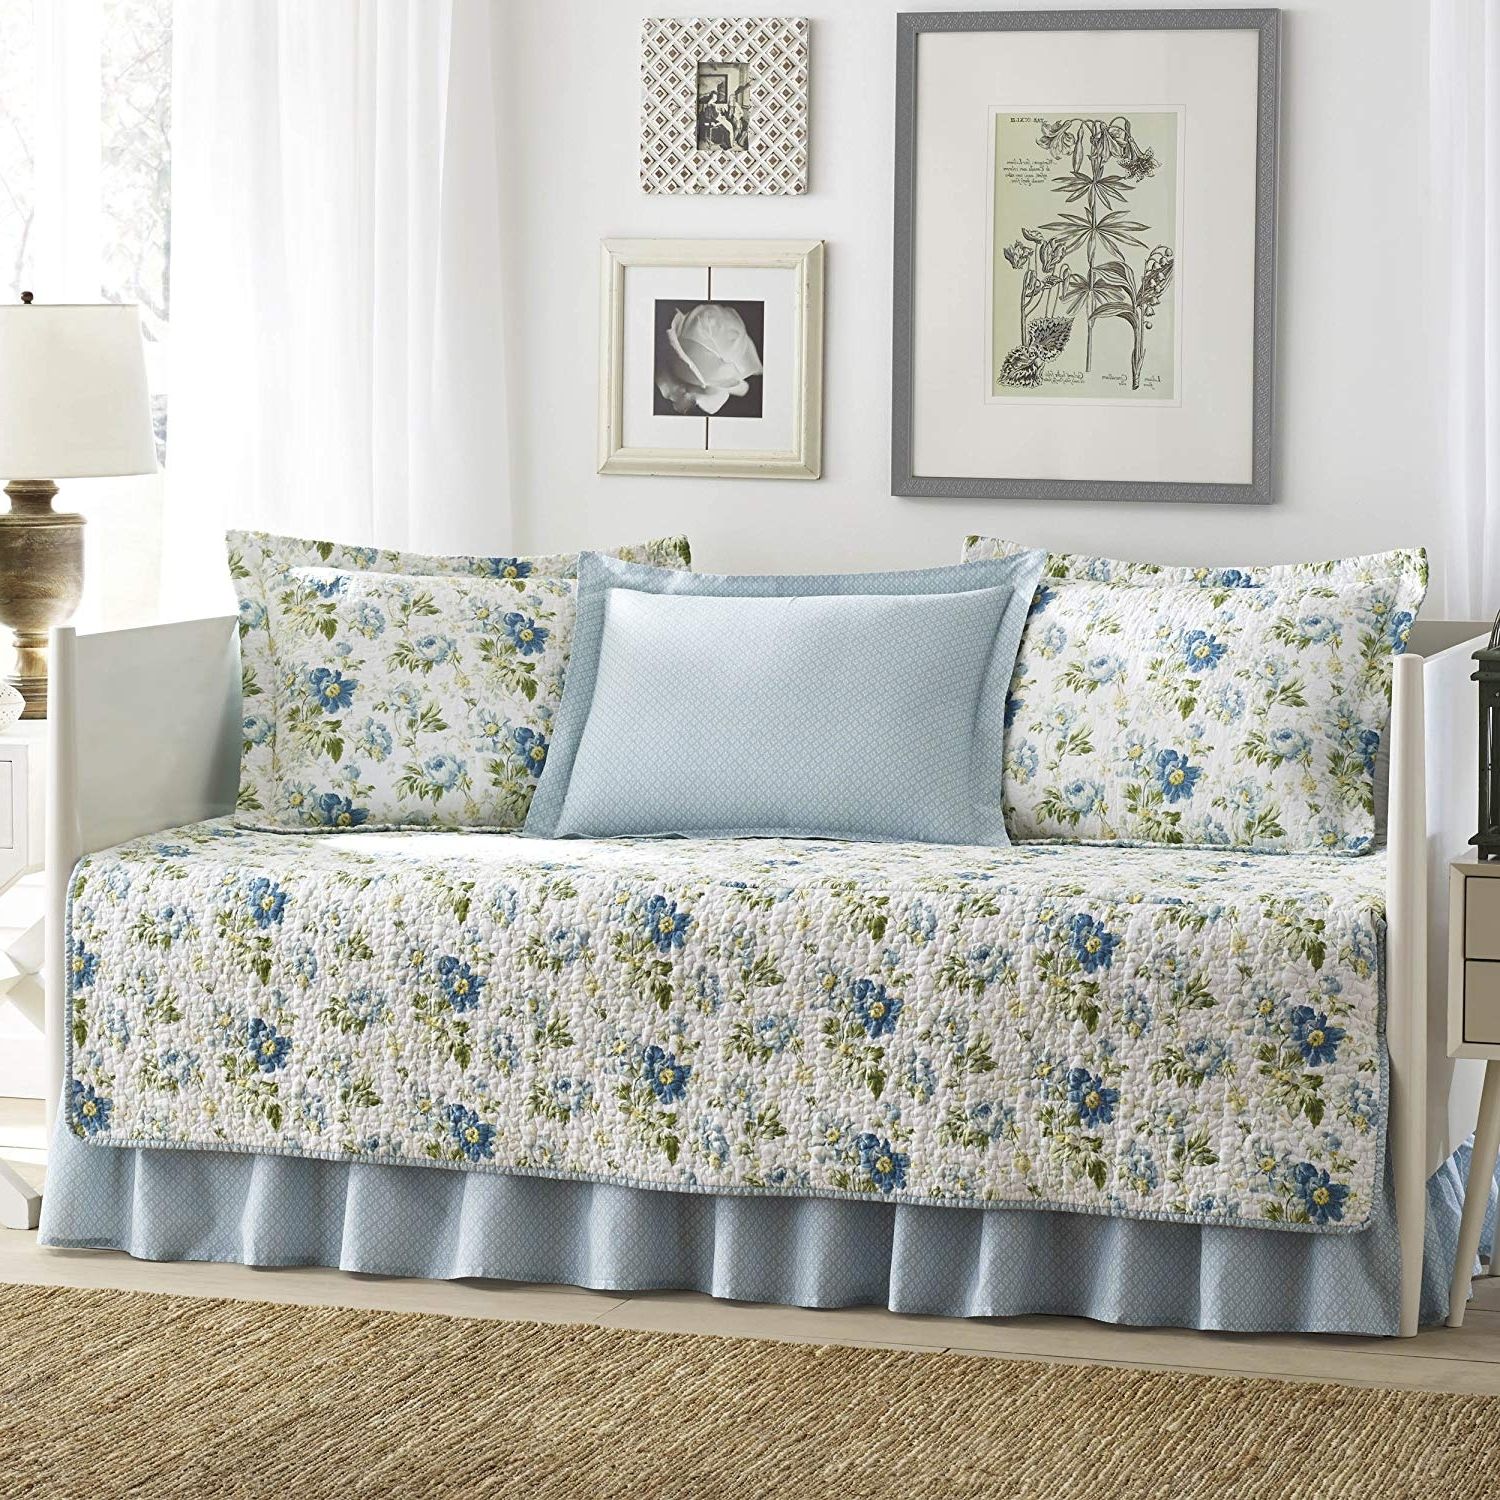 Amazon: Laura Ashley 5 Piece Peony Garden Blue Daybed Cover Set Throughout Trendy Garten Delft Skirted Side Chairs Set Of  (View 5 of 20)